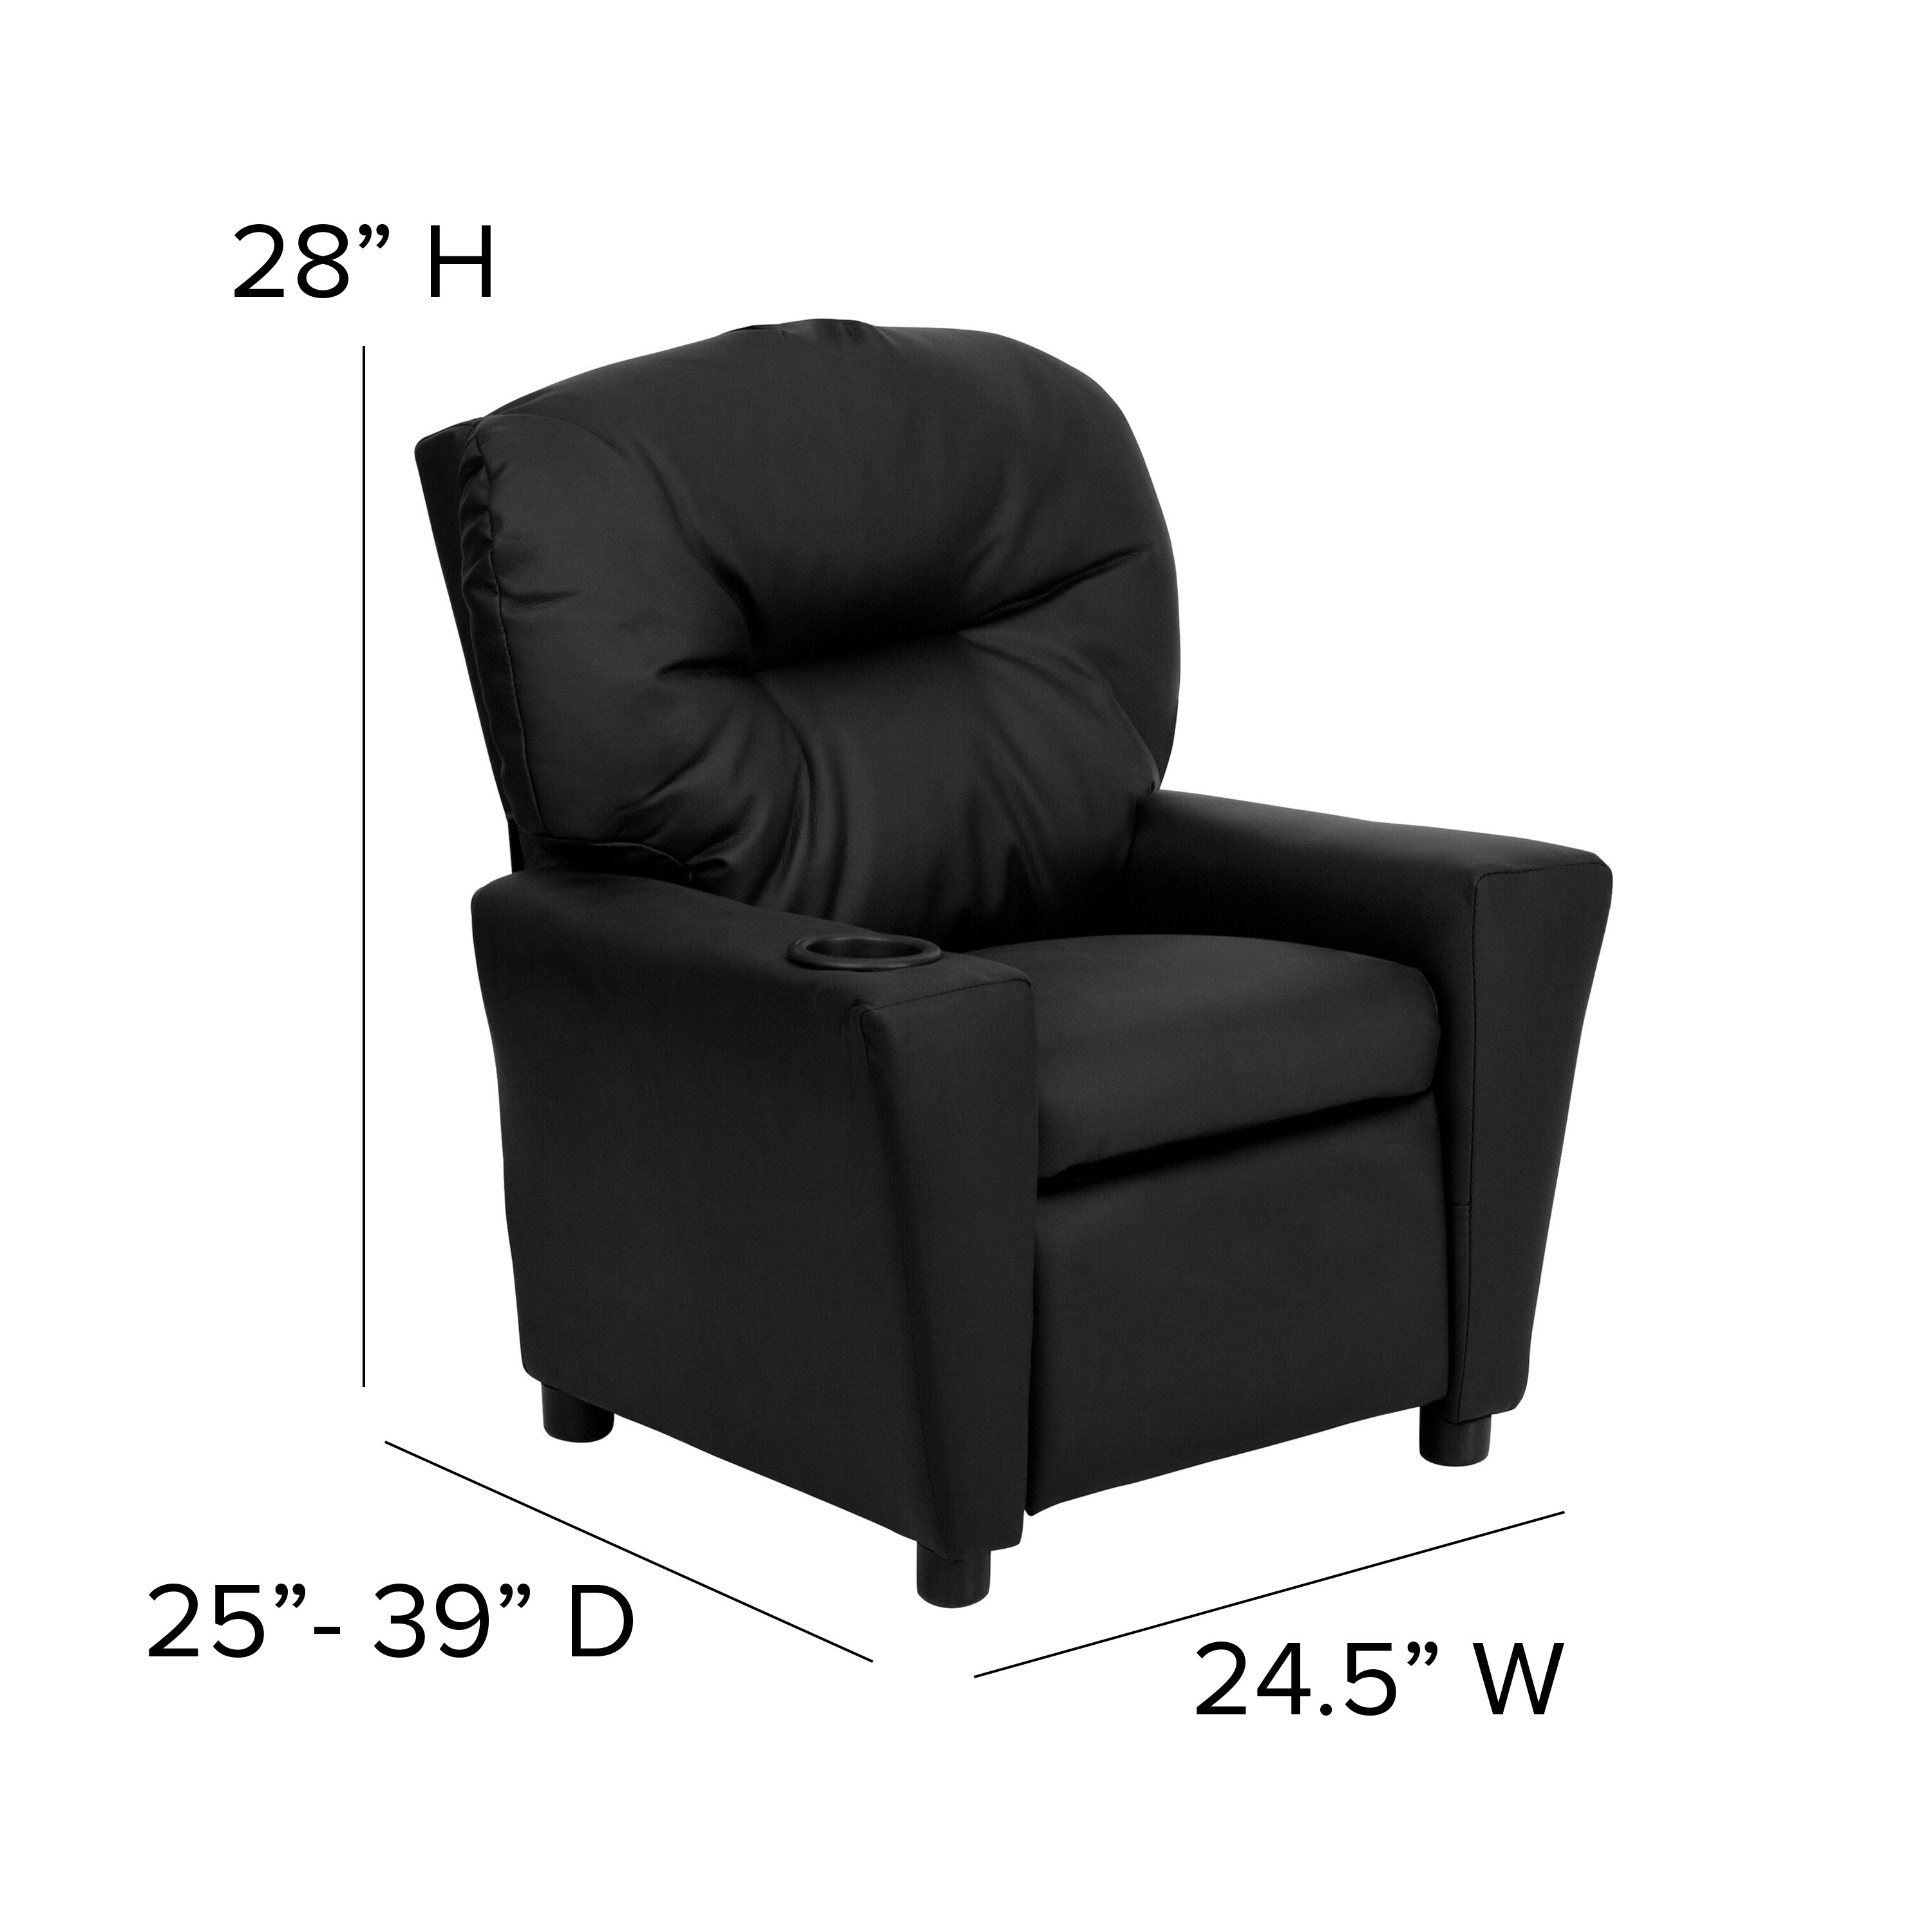 Flash Furniture Arkansas Fort Smith Lions Embroidered Black Leather Kids Recliner with Storage Arms 